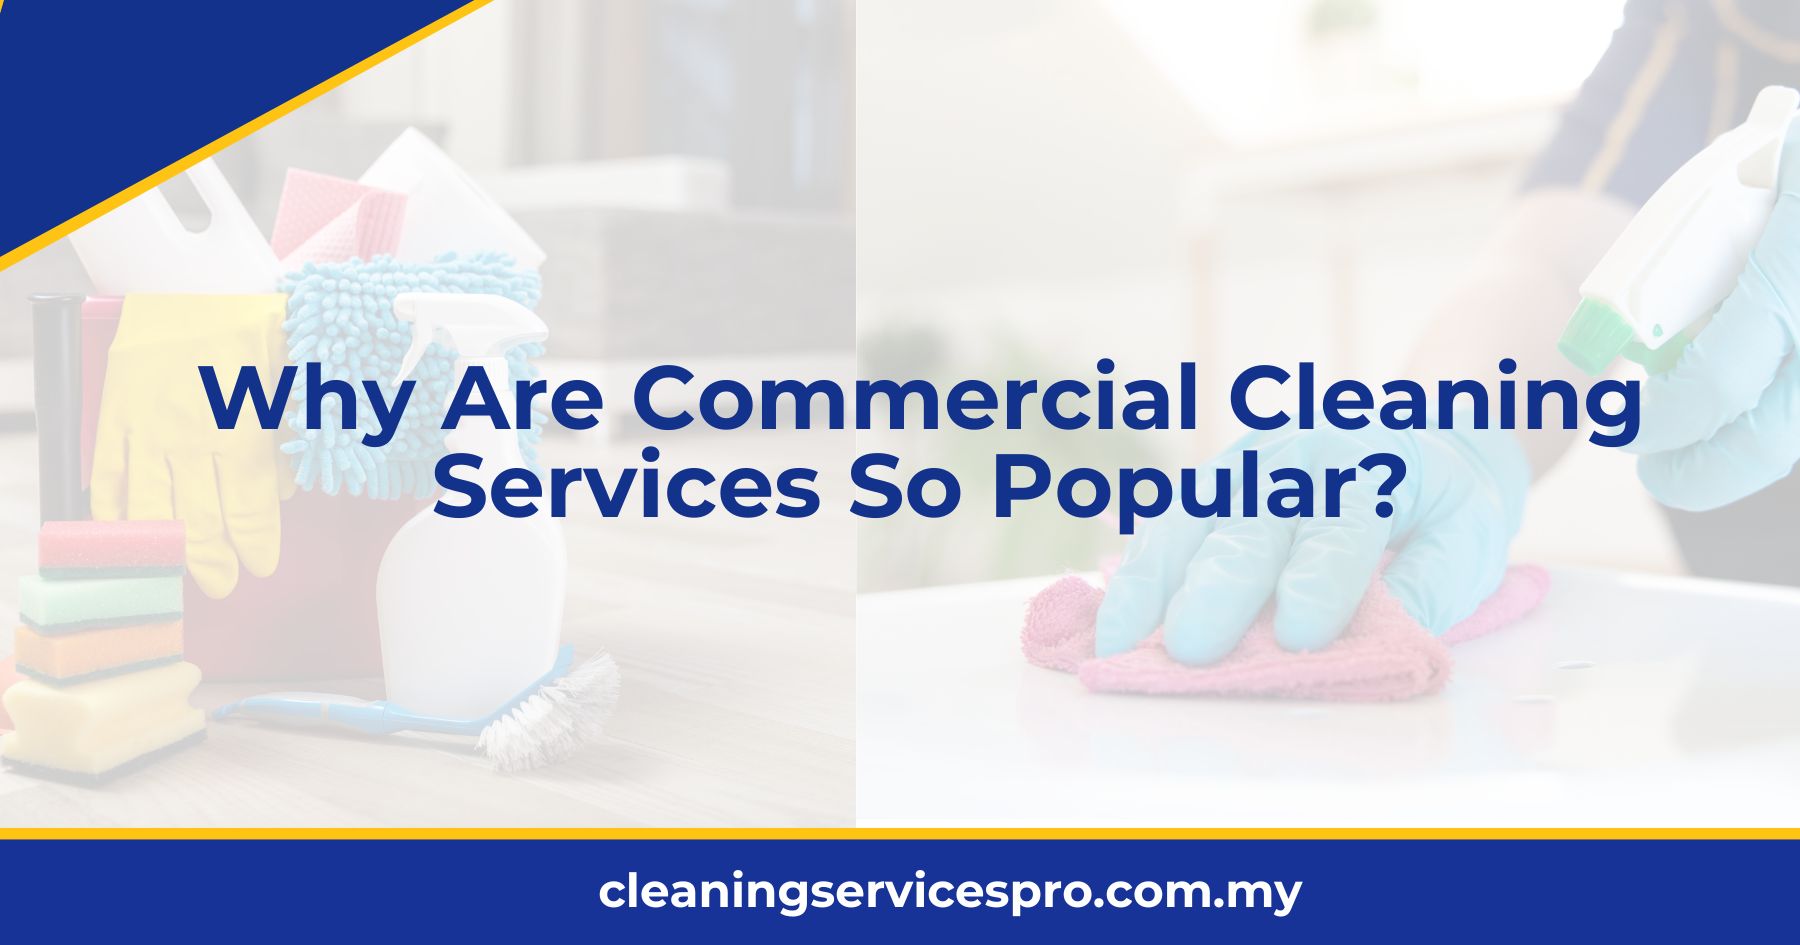 Why Are Commercial Cleaning Services So Popular